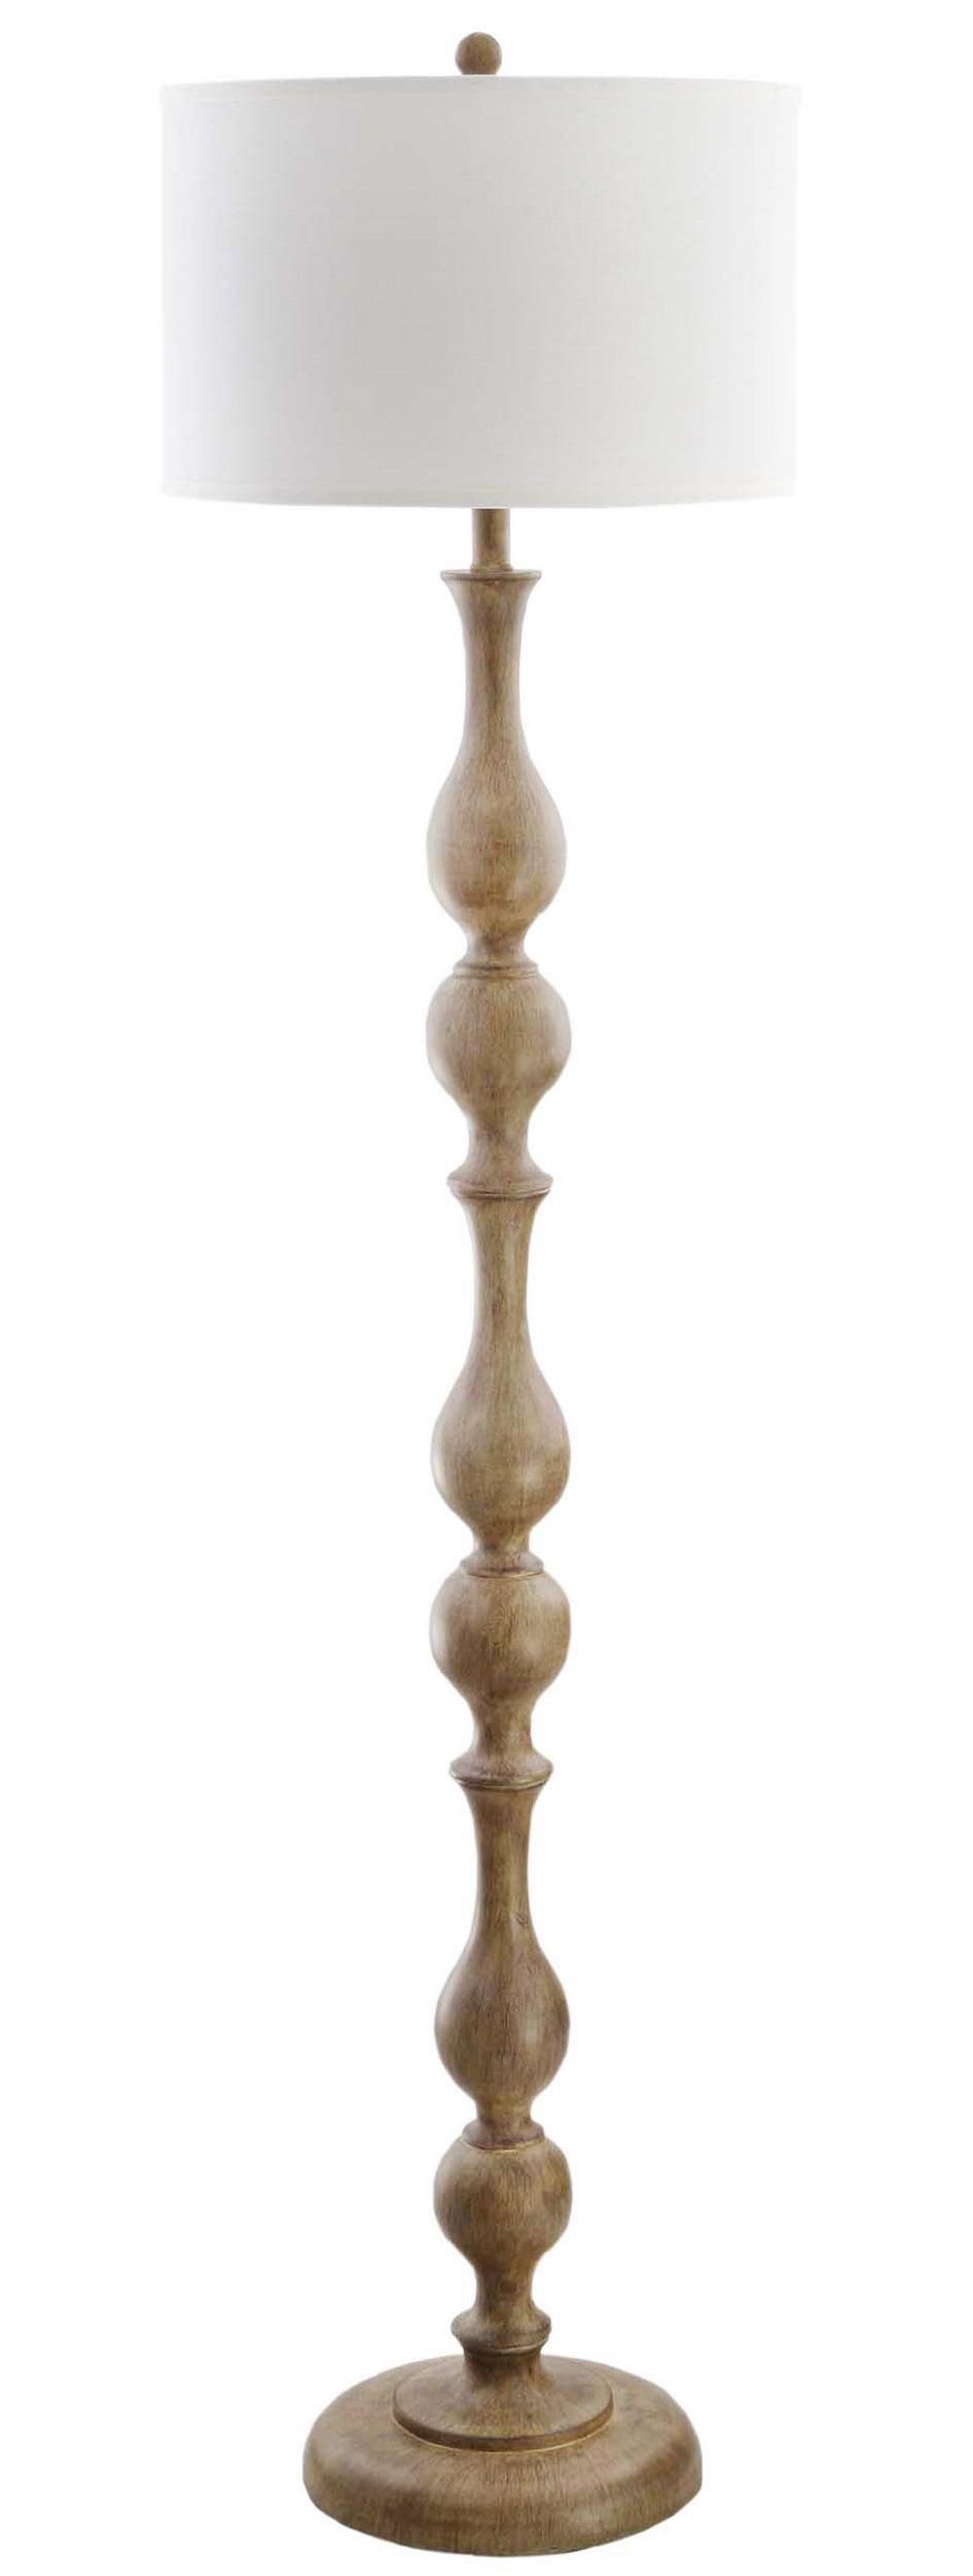 Glendora Traditional 64" Brown Wooden Floor Lamp with White Cotton Shade